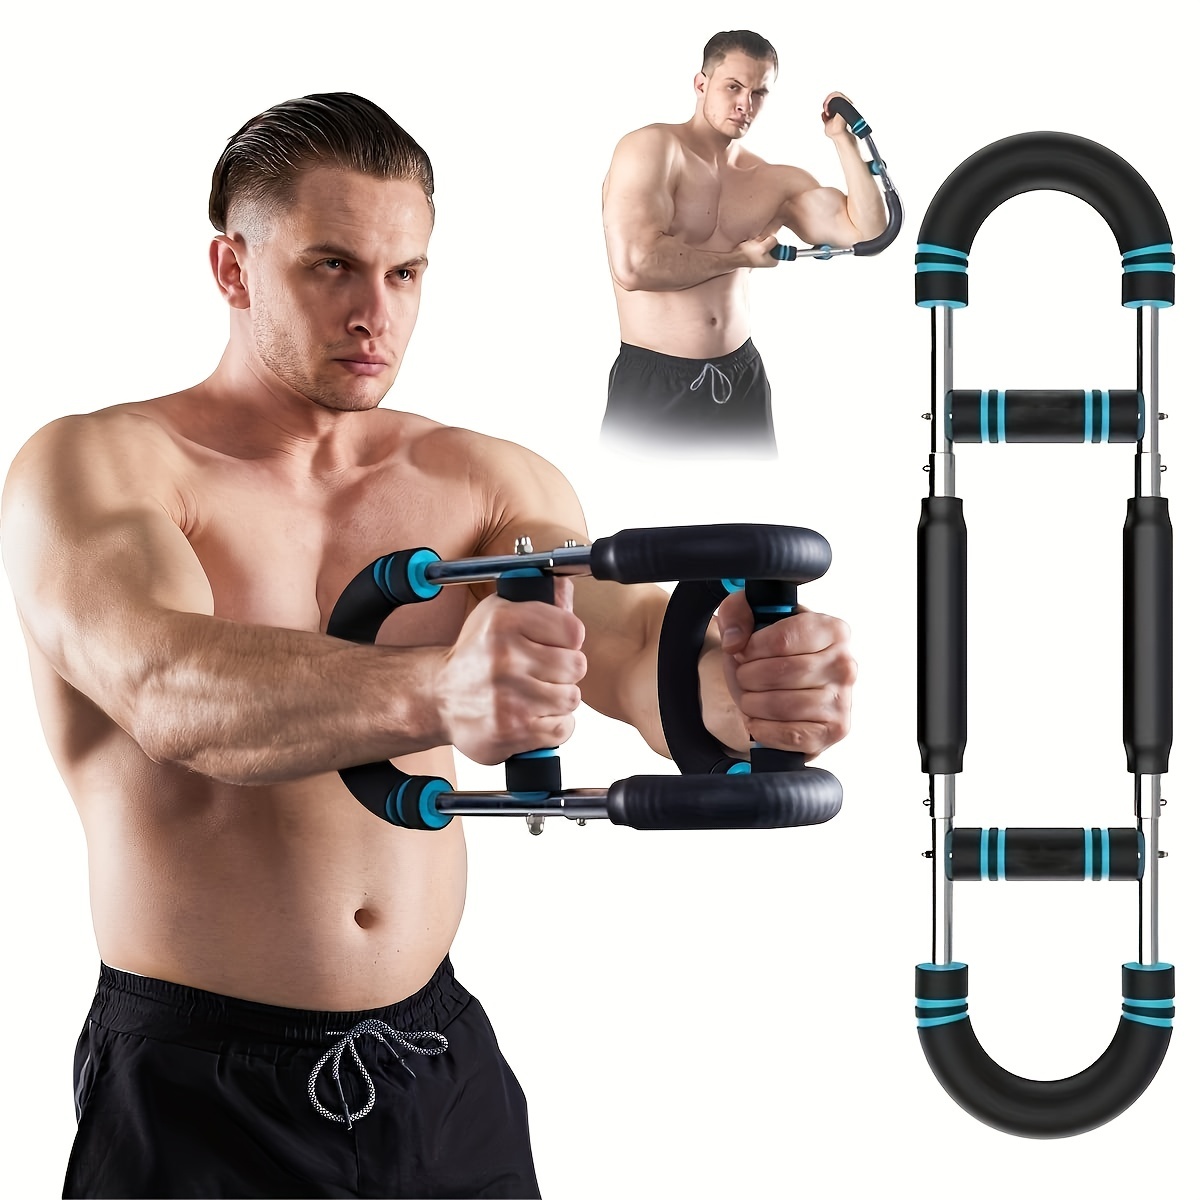 Strengthen Your Arms and Chest with this Portable Resistance Home Exercise  Equipment!